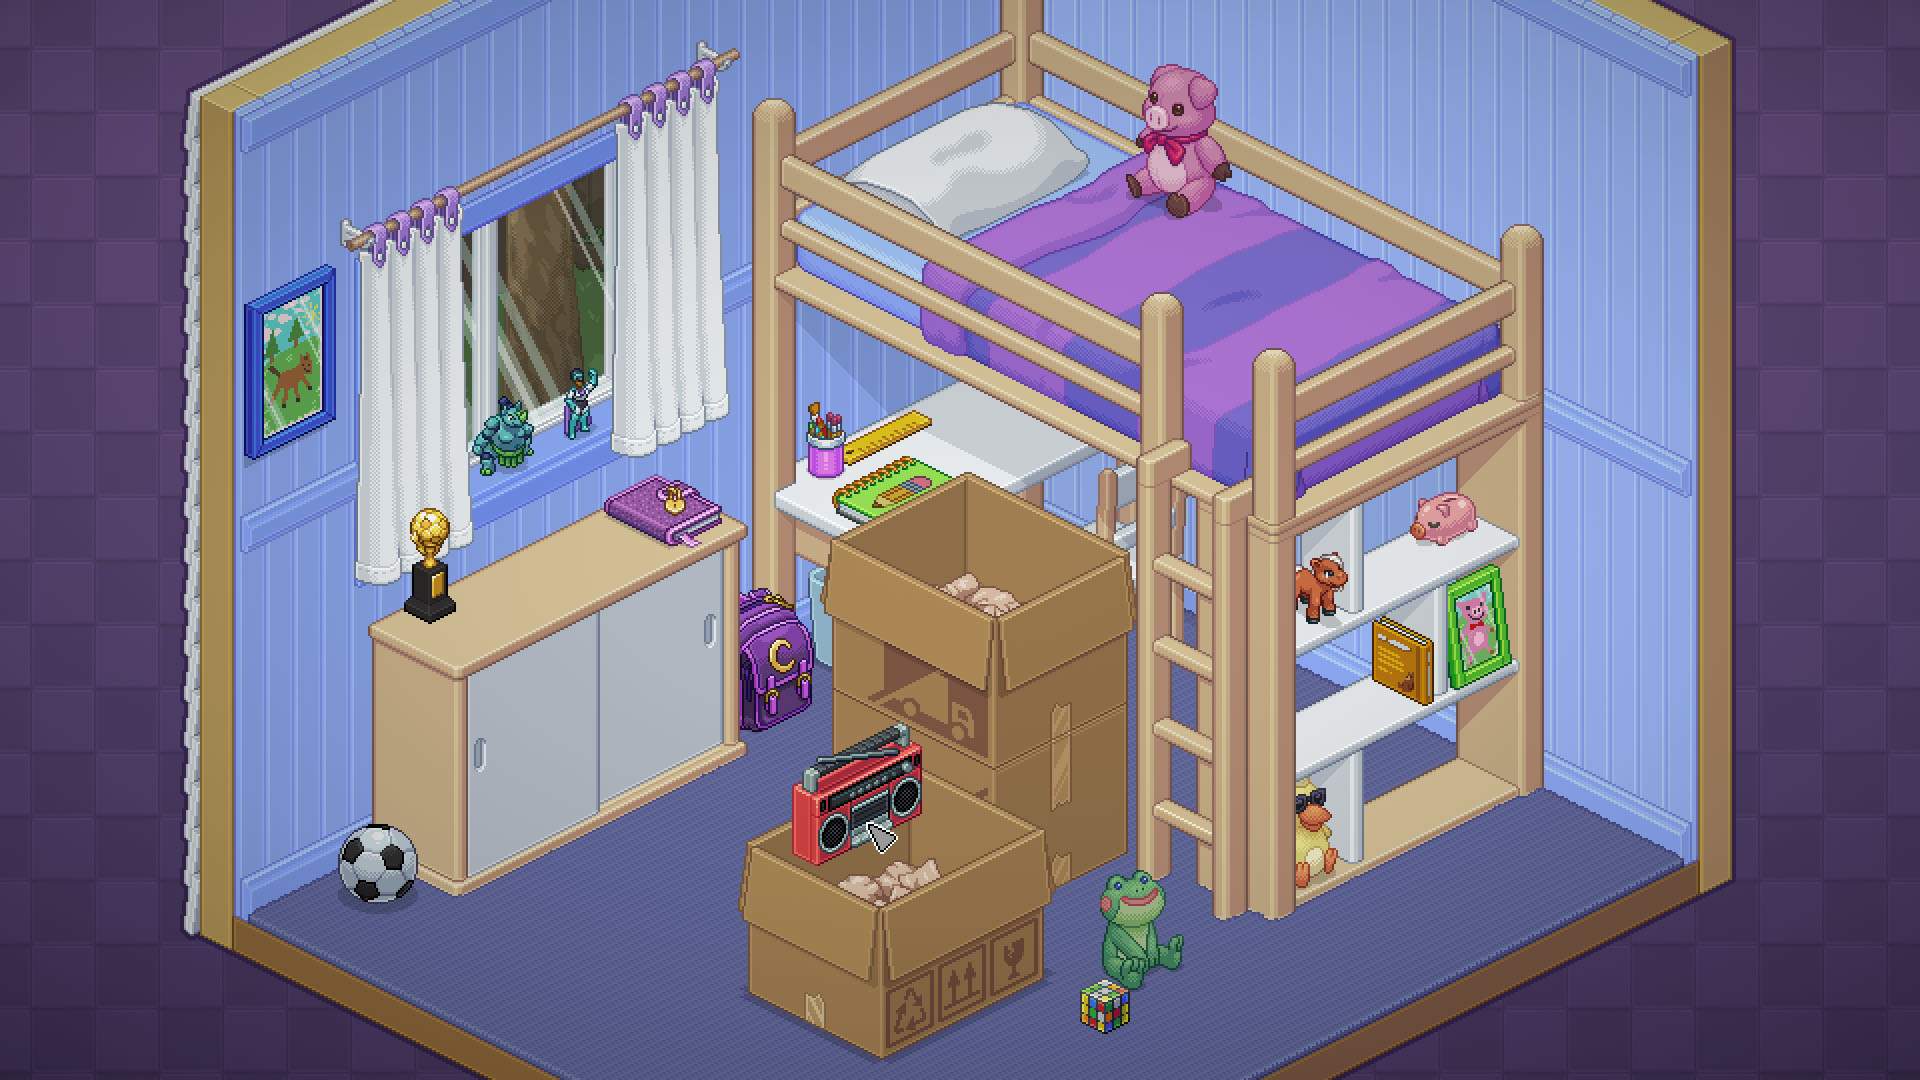 A screenshot from the game Unpacking, one of the best Australia video games, showing a little girl's possession scattered around her childhood bedroom